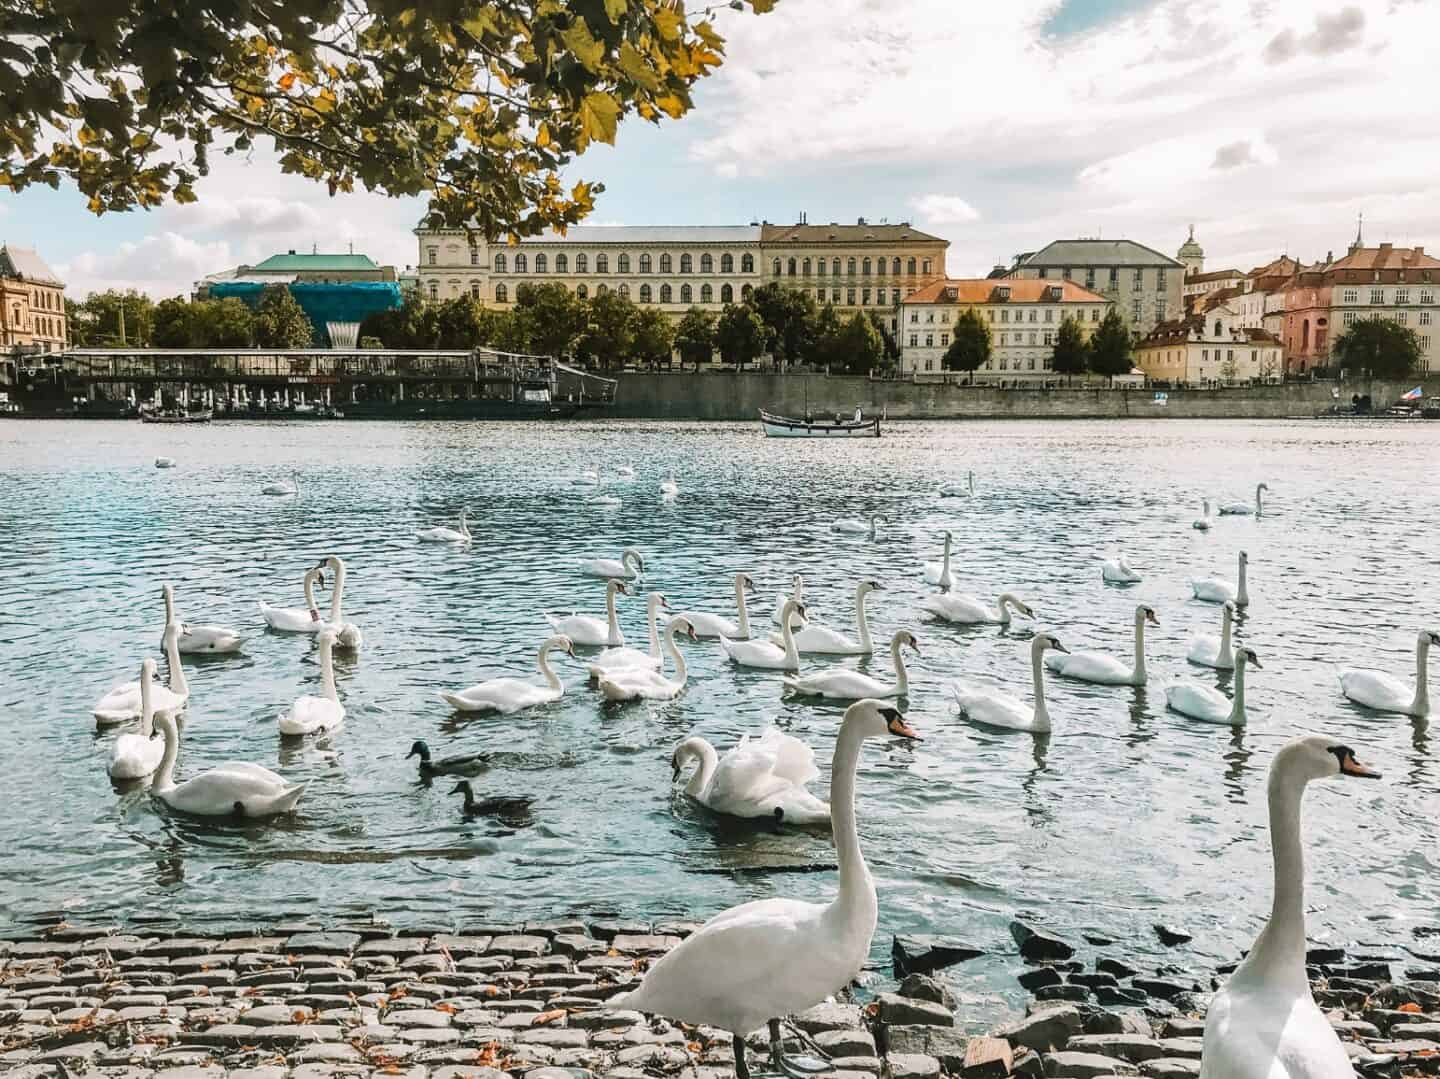 A spot along the Vltava River with hundreds of swans can be found daily.